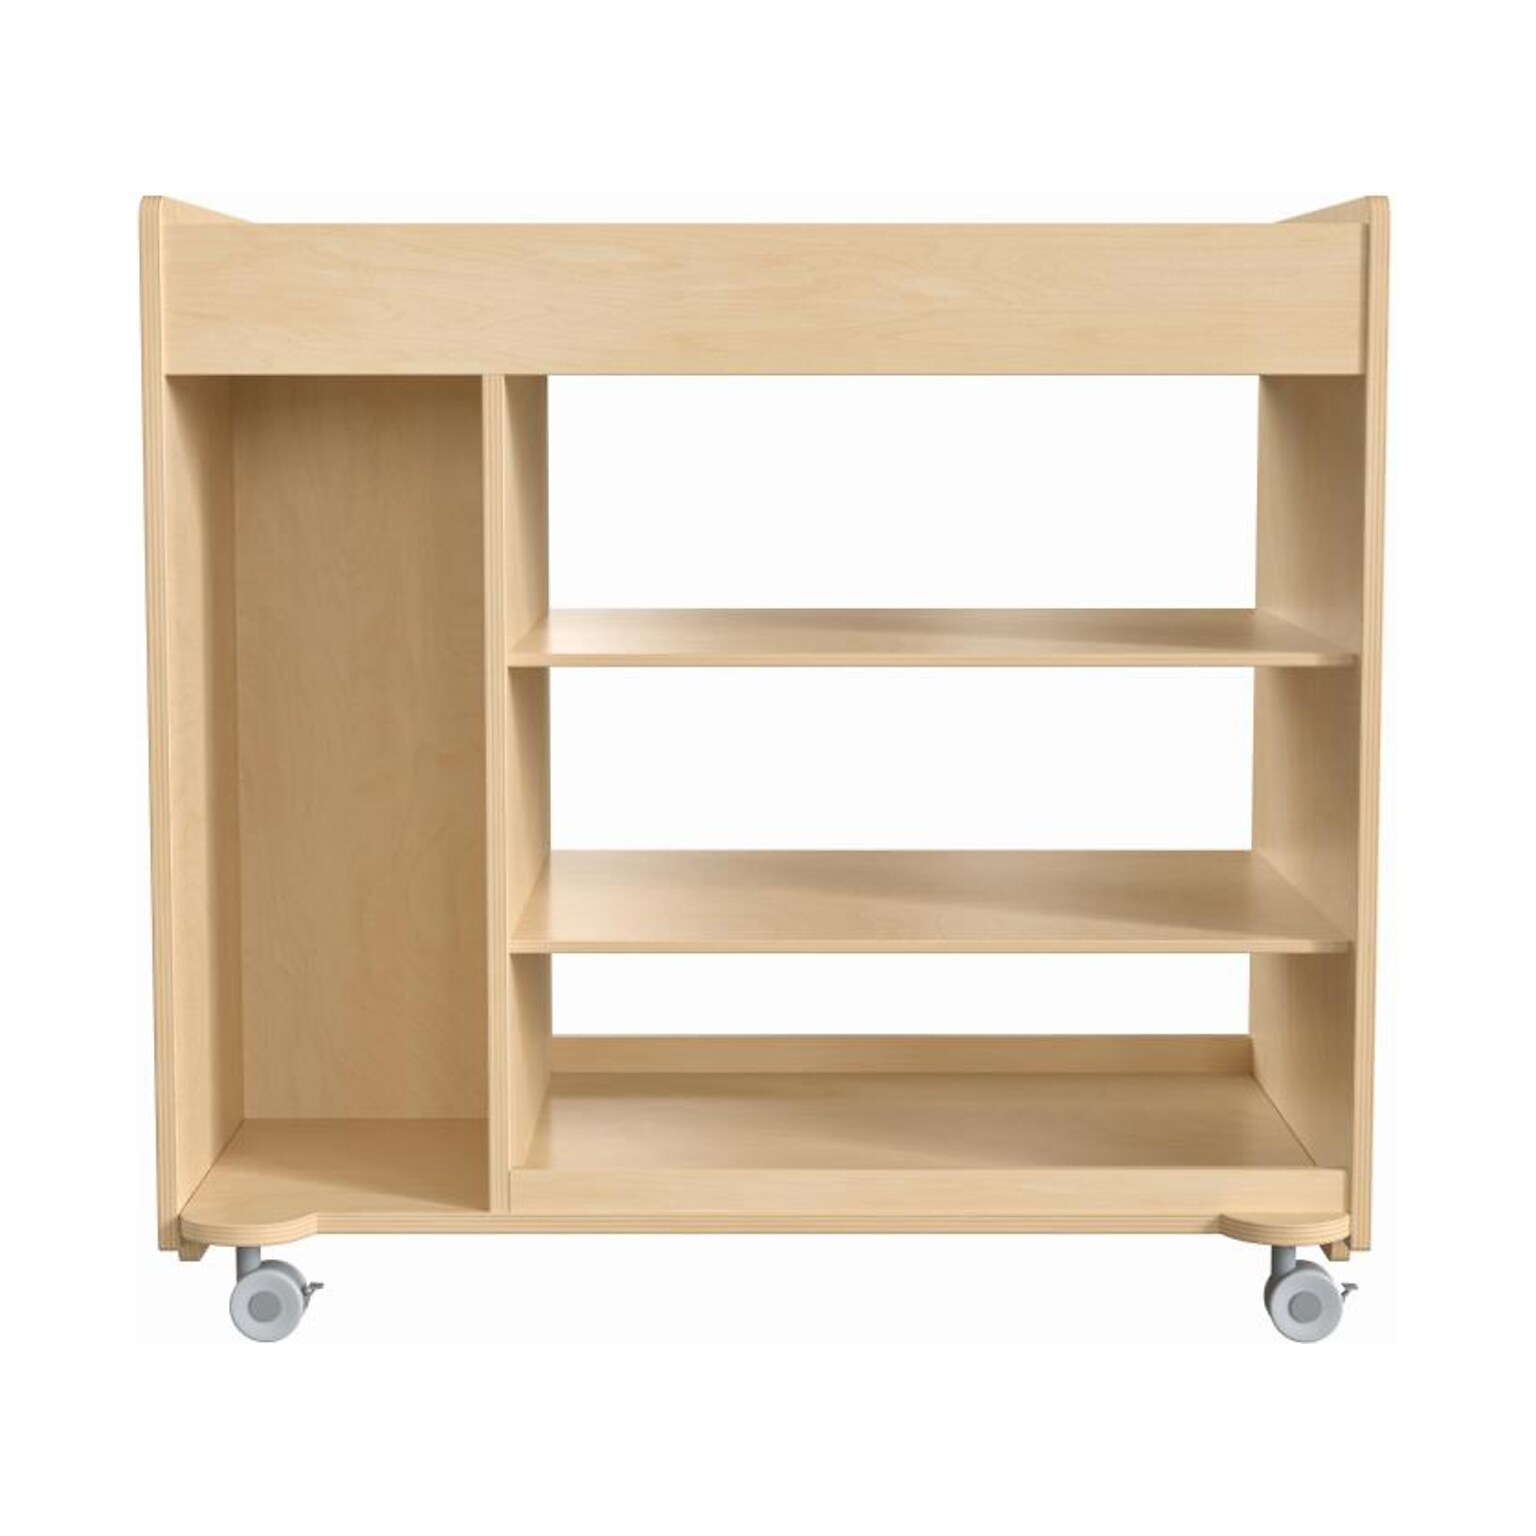 Flash Furniture Bright Beginnings Mobile 8-Section Storage Cart, 31.5H x 33W x 23D, Natural Birch Plywood (MK-ME14504-GG)